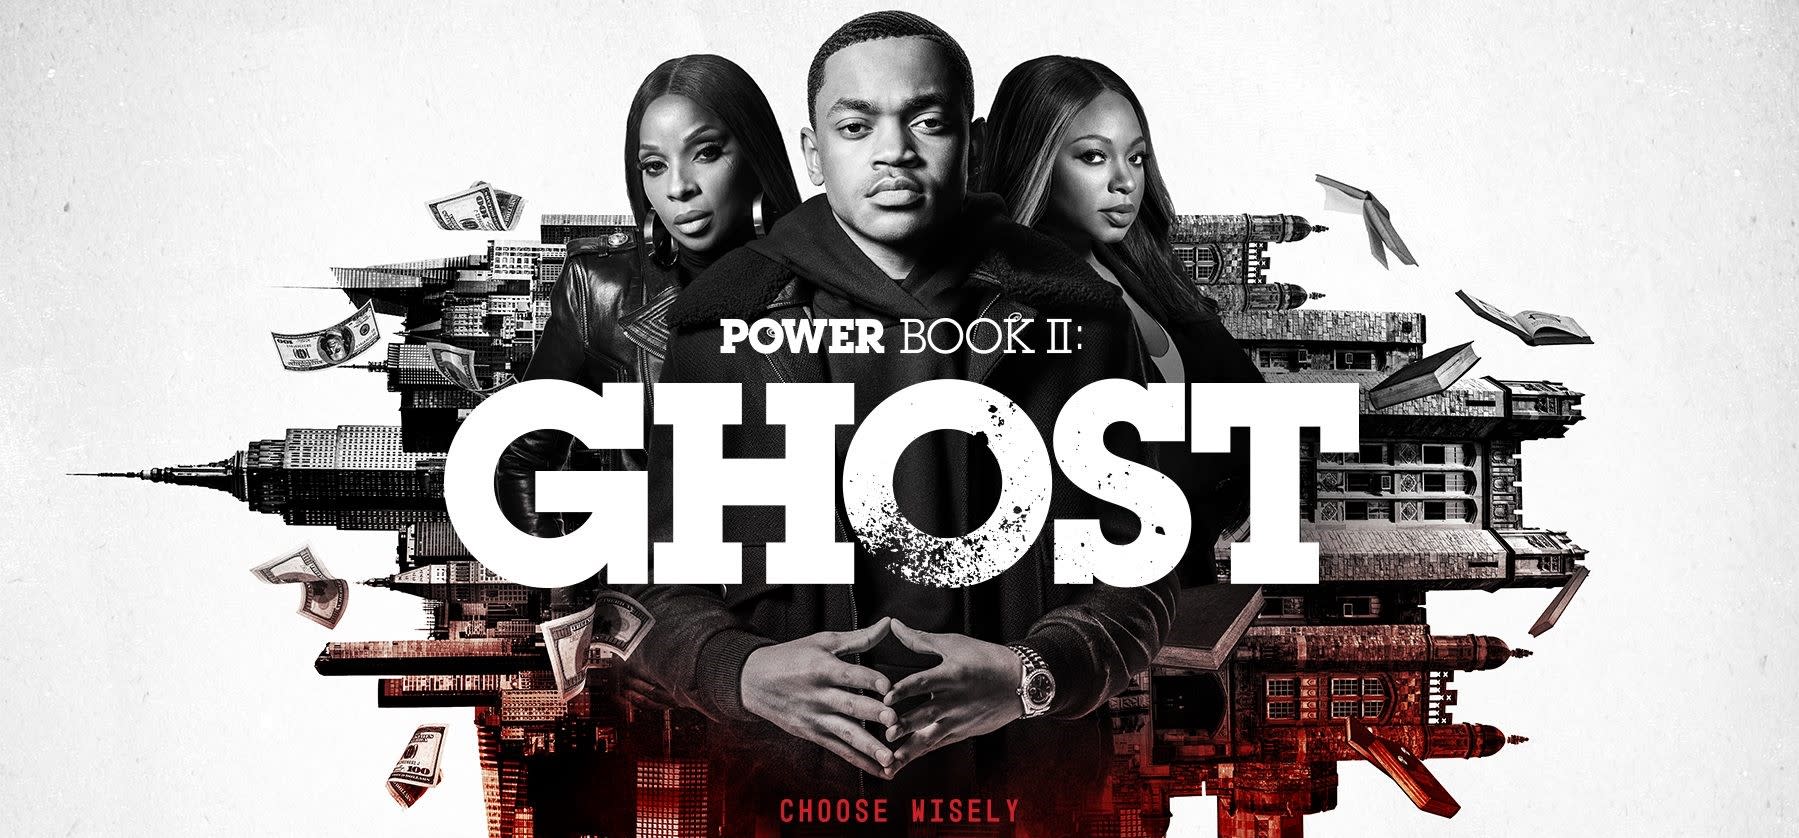 Power Book II: Ghost 1x02 Promo Exceeding Expectations (HD) This Season  On 